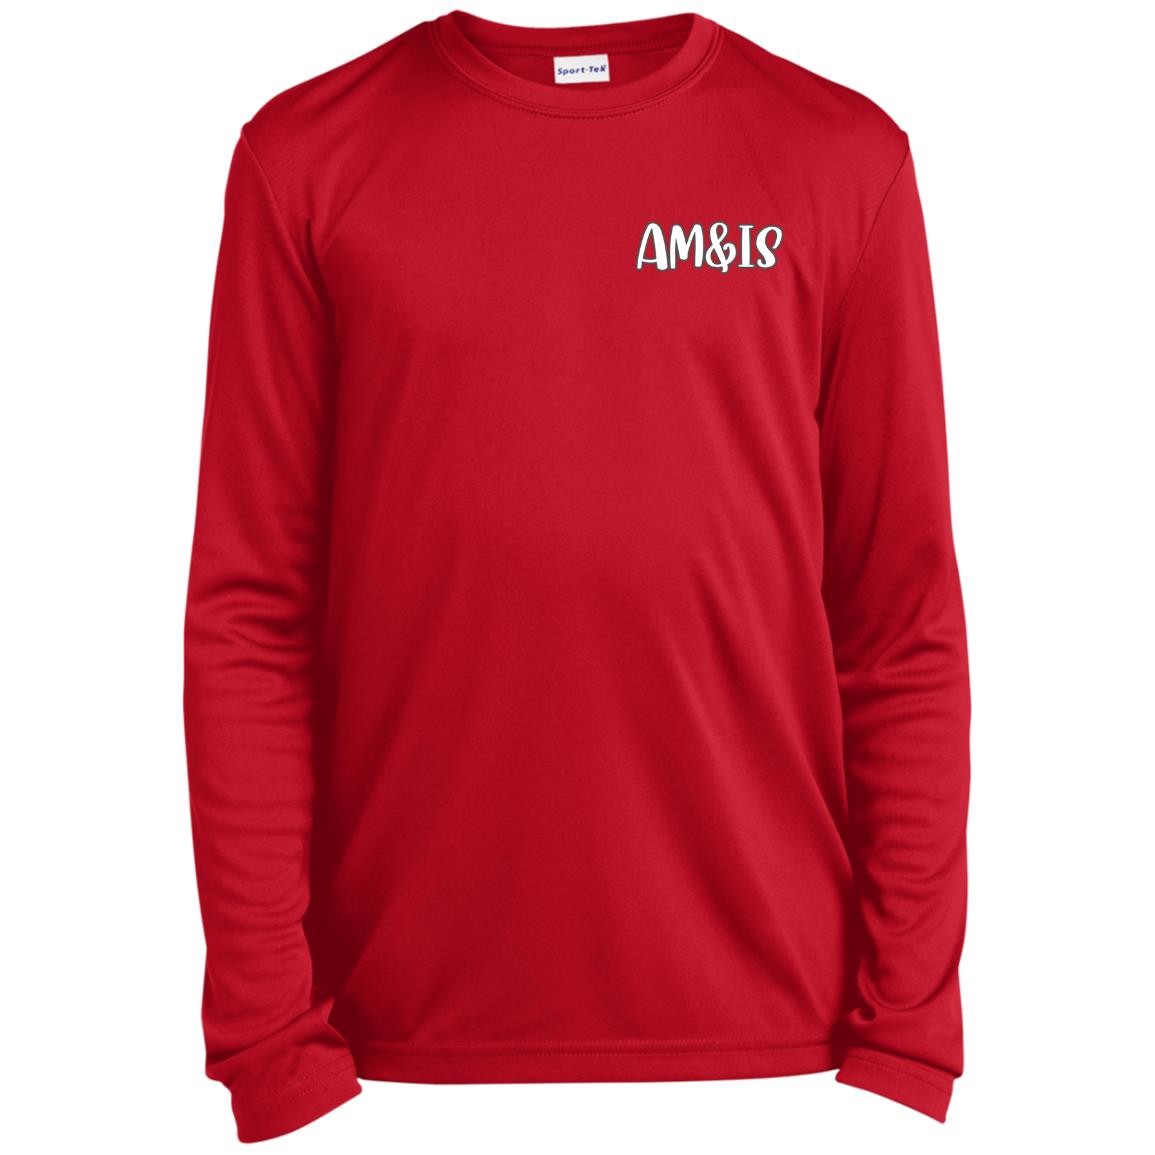 TRUE RED - AM&IS Activewear Youth Long Sleeve Performance Tee - kids t-shirts at TFC&H Co.